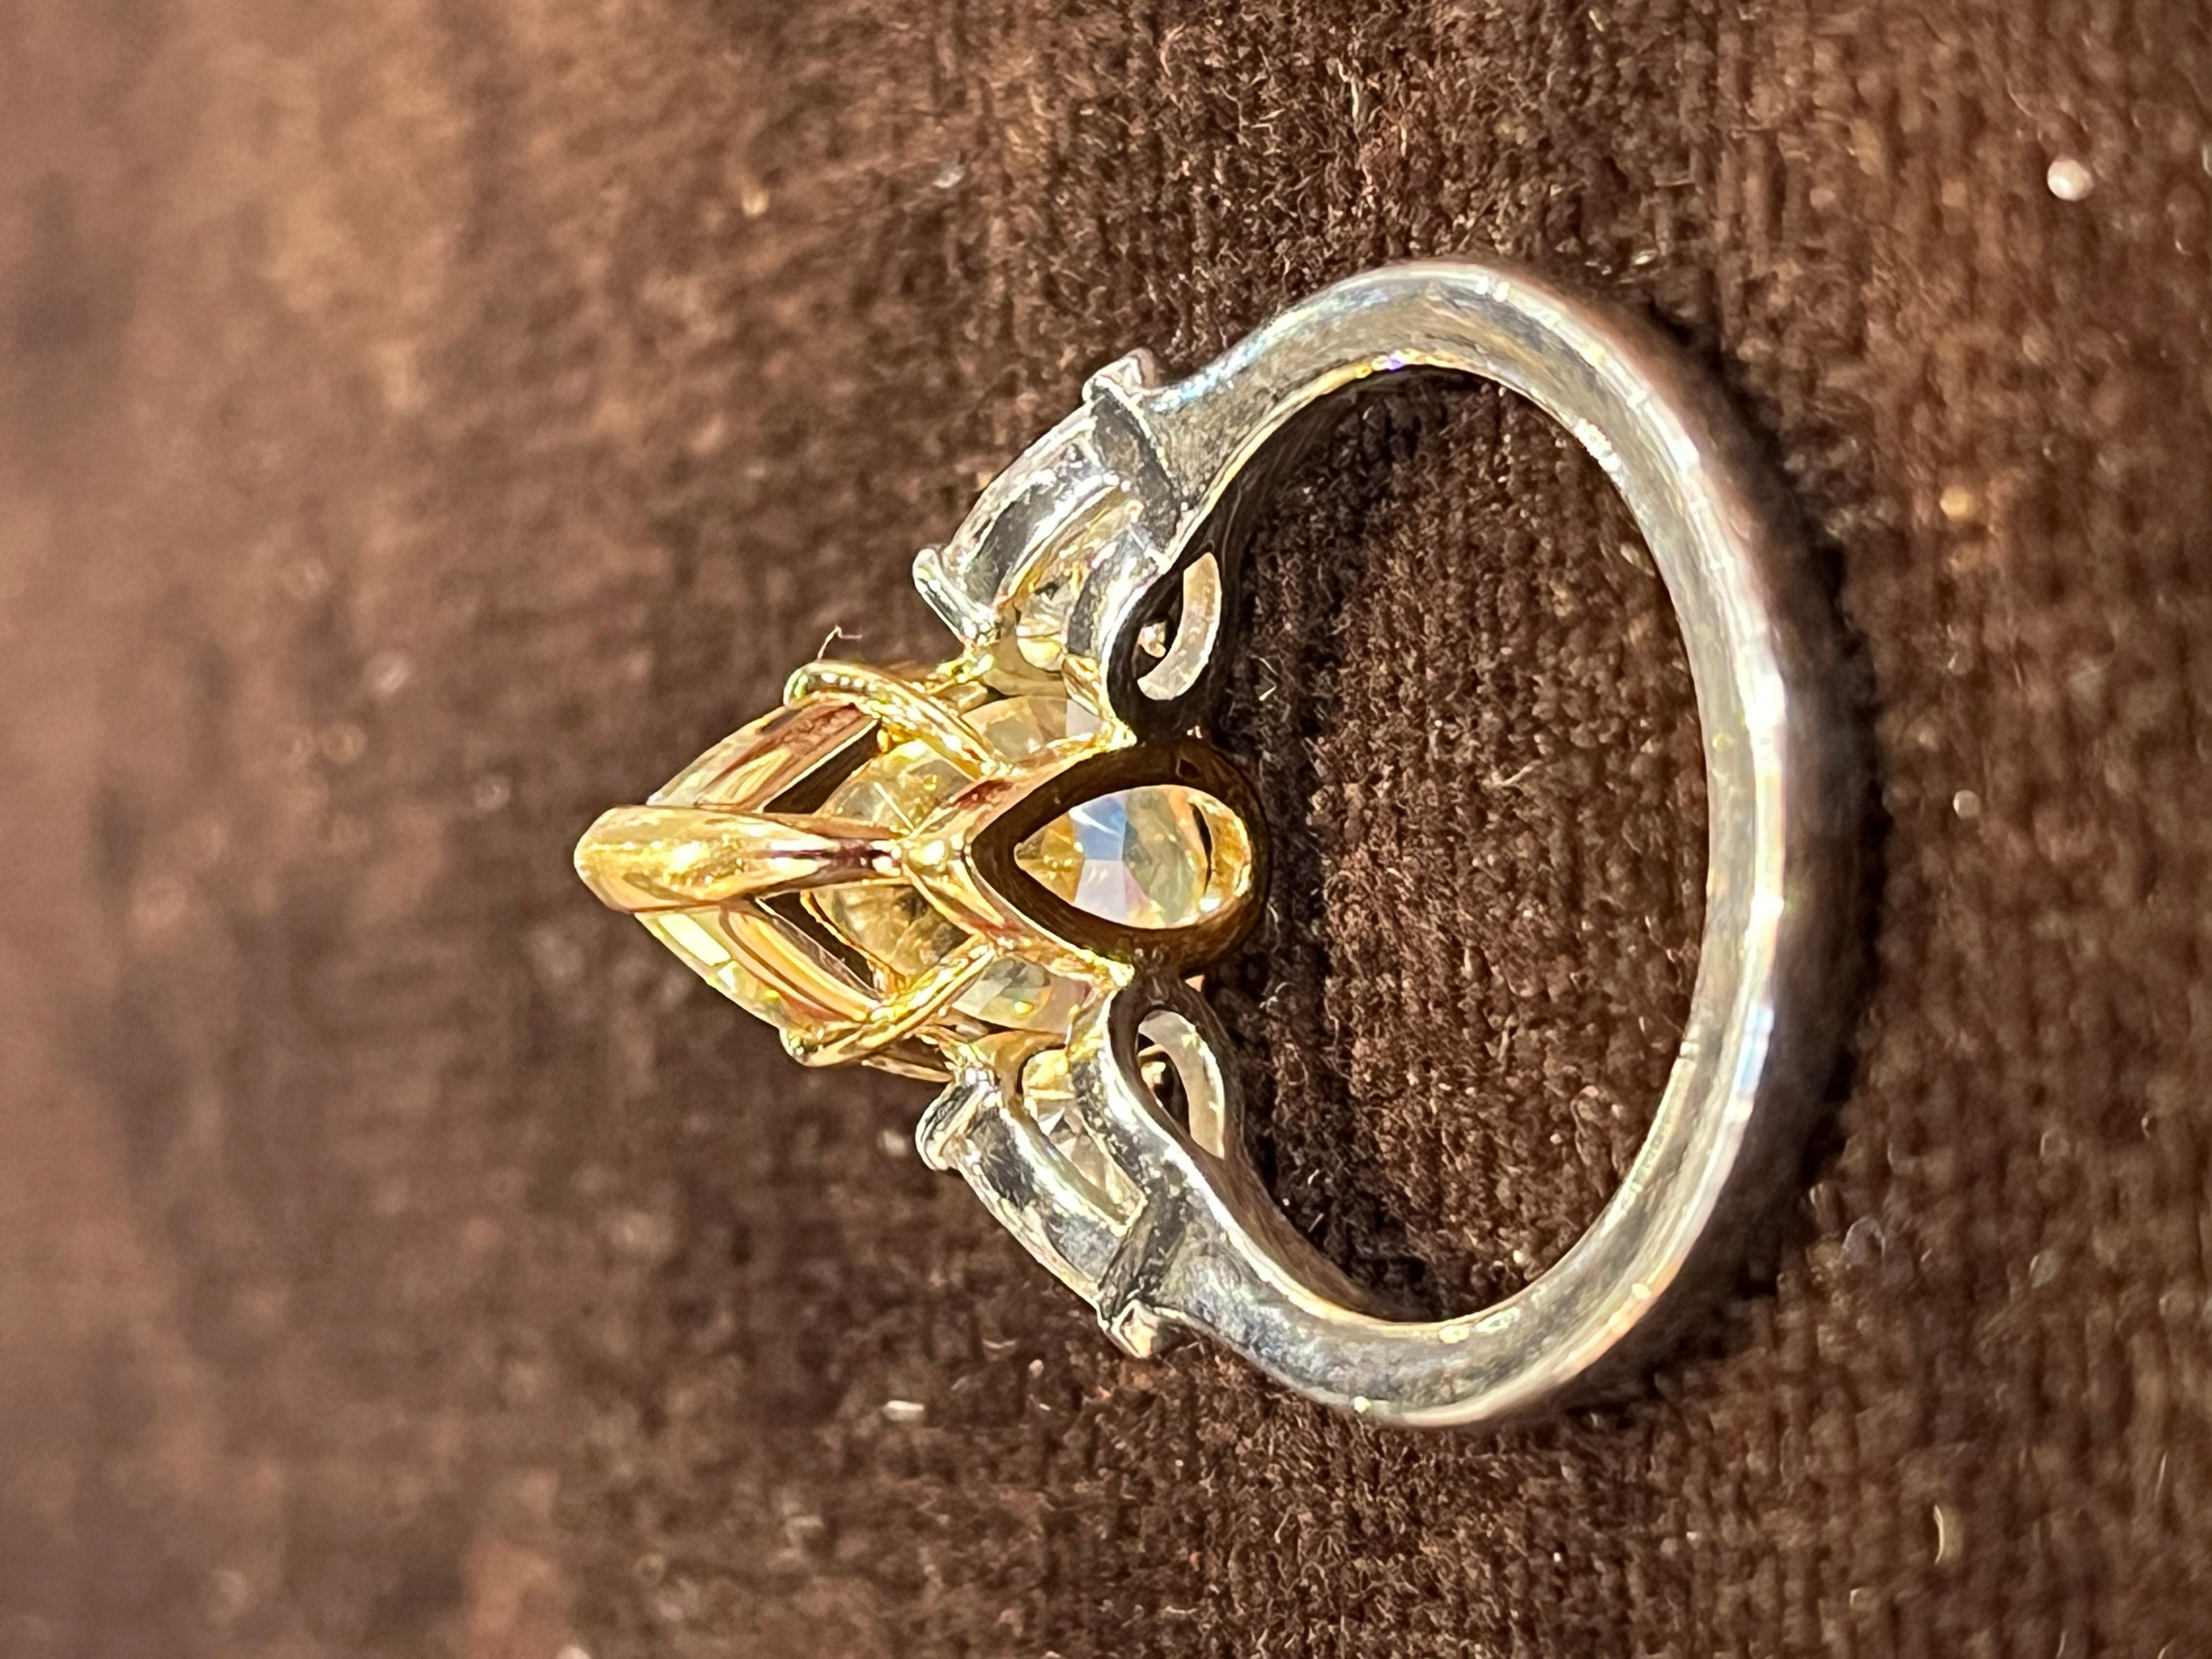 GIA 4.01cts Yellow Diamond Engagement Ring set in Platinum 950 and 18K Gold In New Condition For Sale In Miami, FL